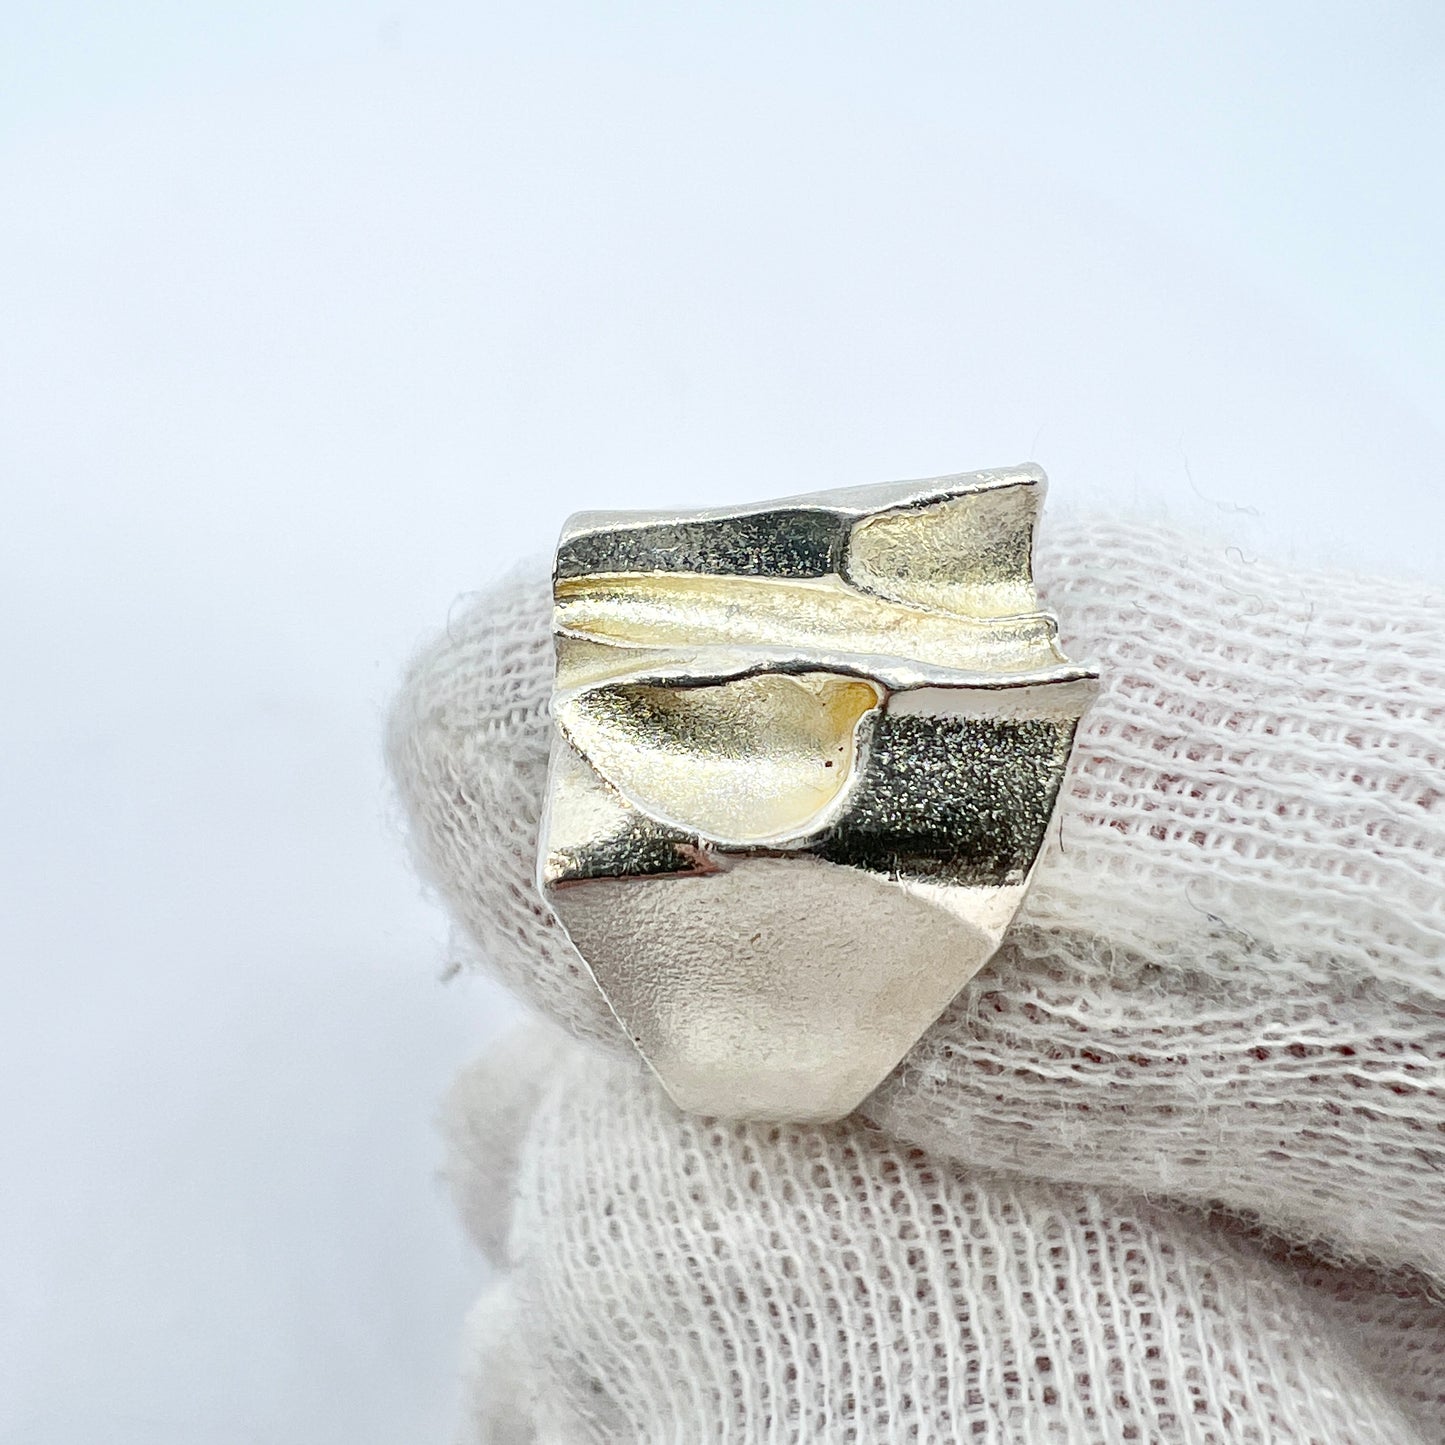 Bjorn Weckstrom for Lapponia, Finland 1979. Vintage Sterling Silver Ring.